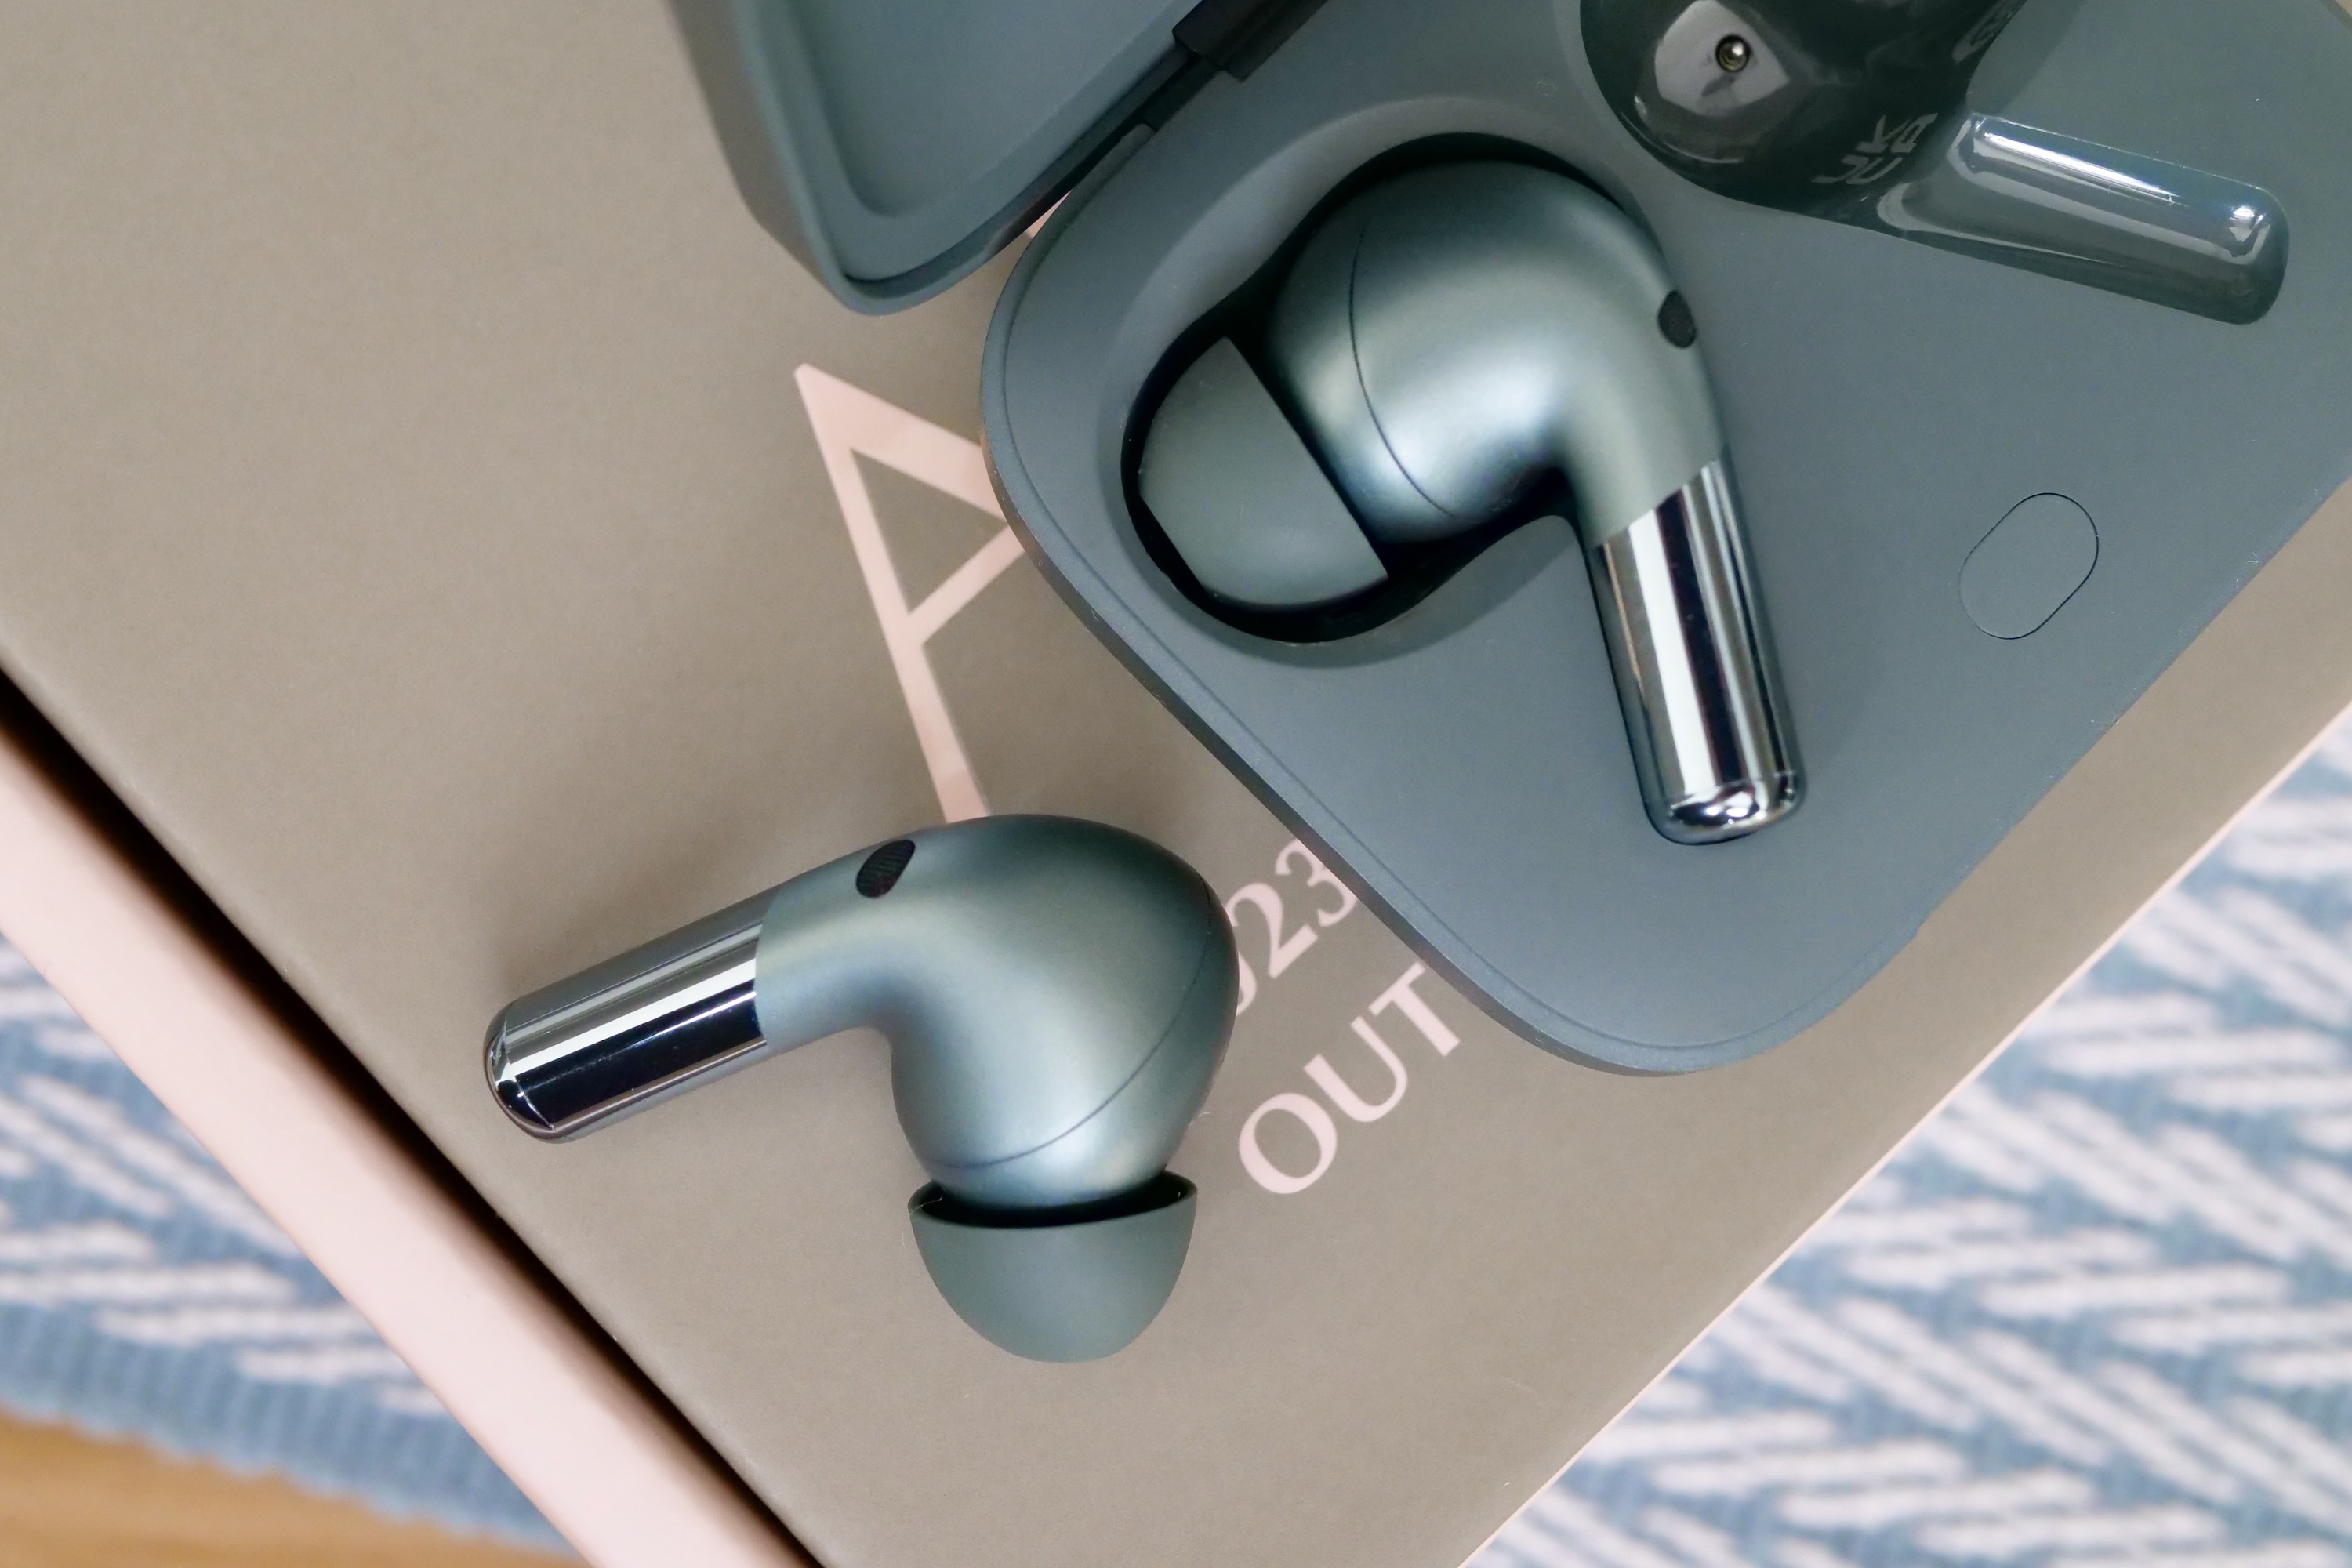 OnePlus Buds Pro 2 - Obsidian Black - Audiophile-Grade Sound Quality  Co-Created with Dynaudio, Best-in-Class ANC, Immersive Spatial Audio, Up to  39